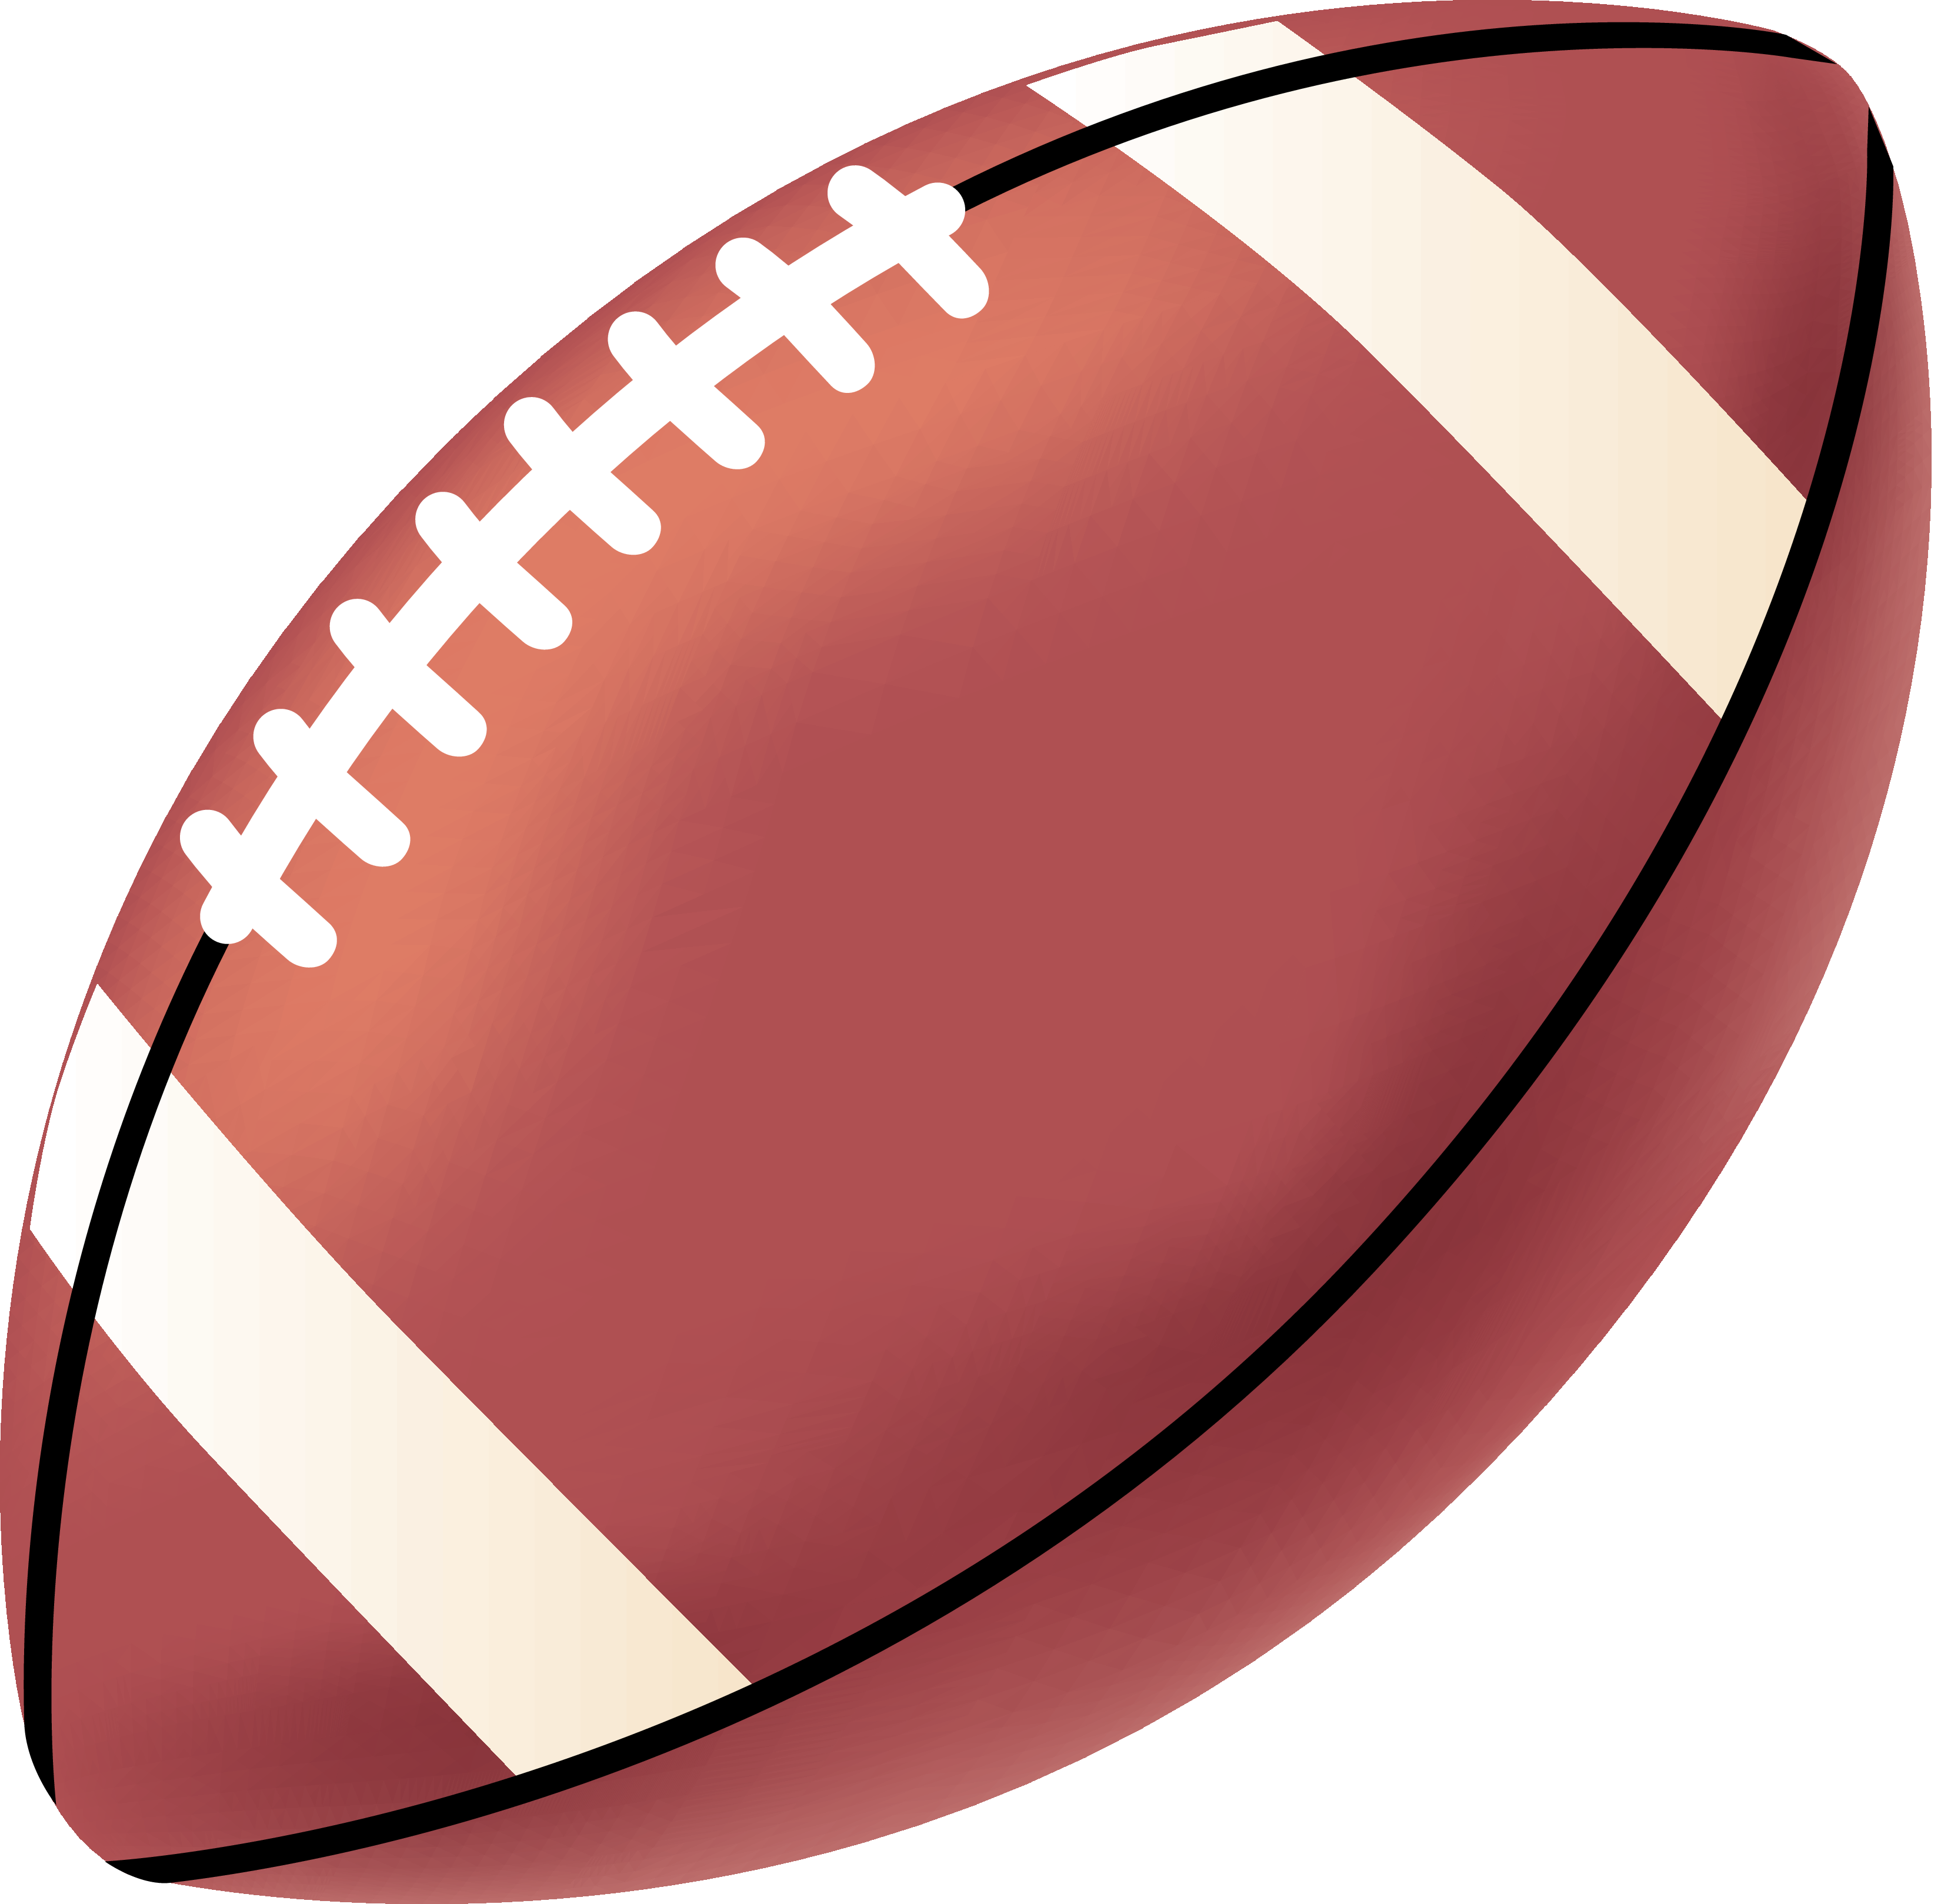 Football Printable Images Clipart Clipart